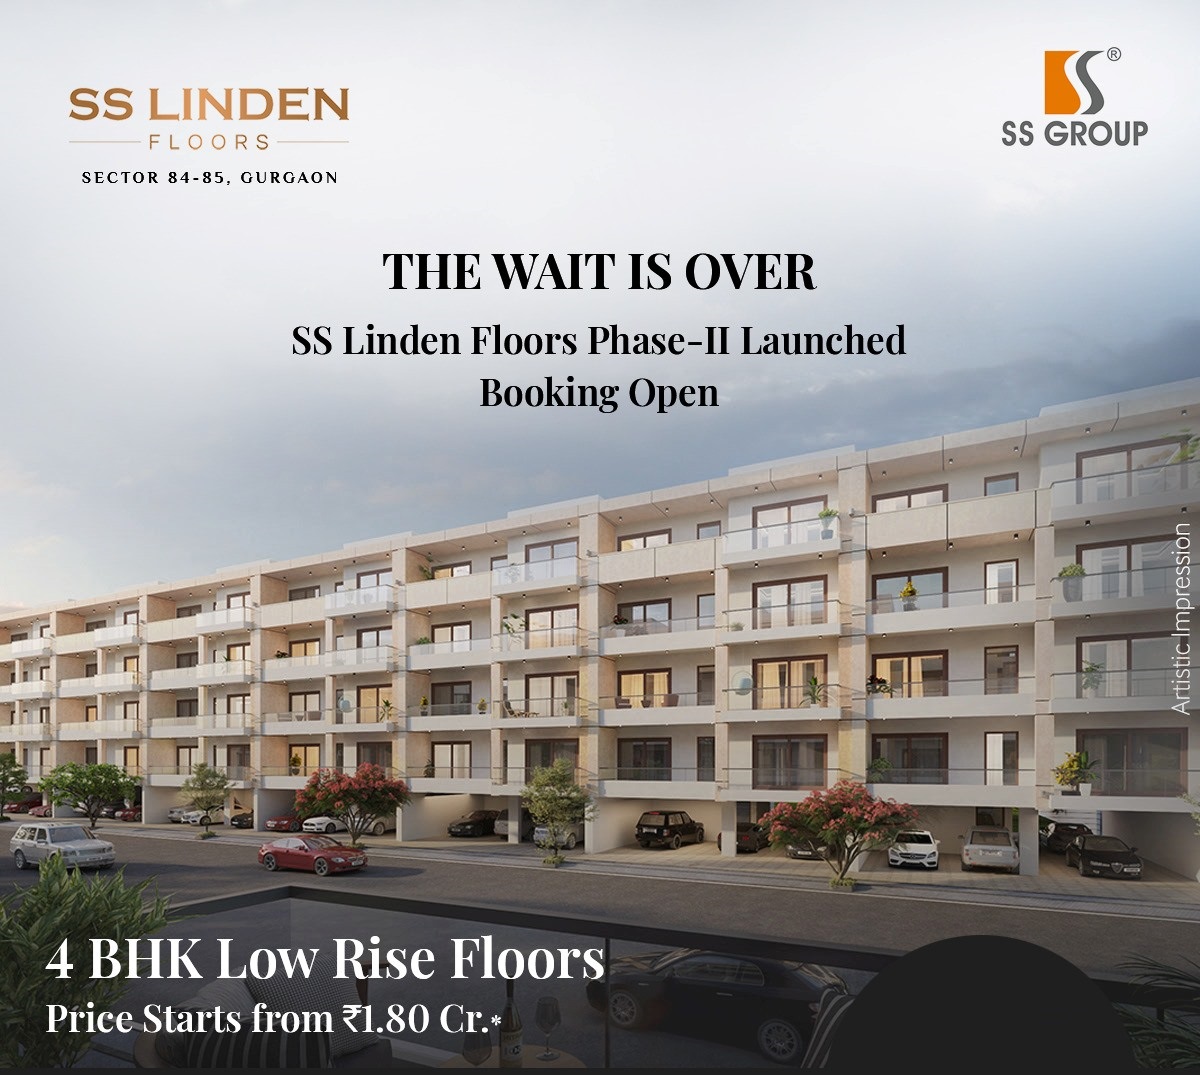 SS Linden Floors Phase 2 launched and booking open in Gurgaon